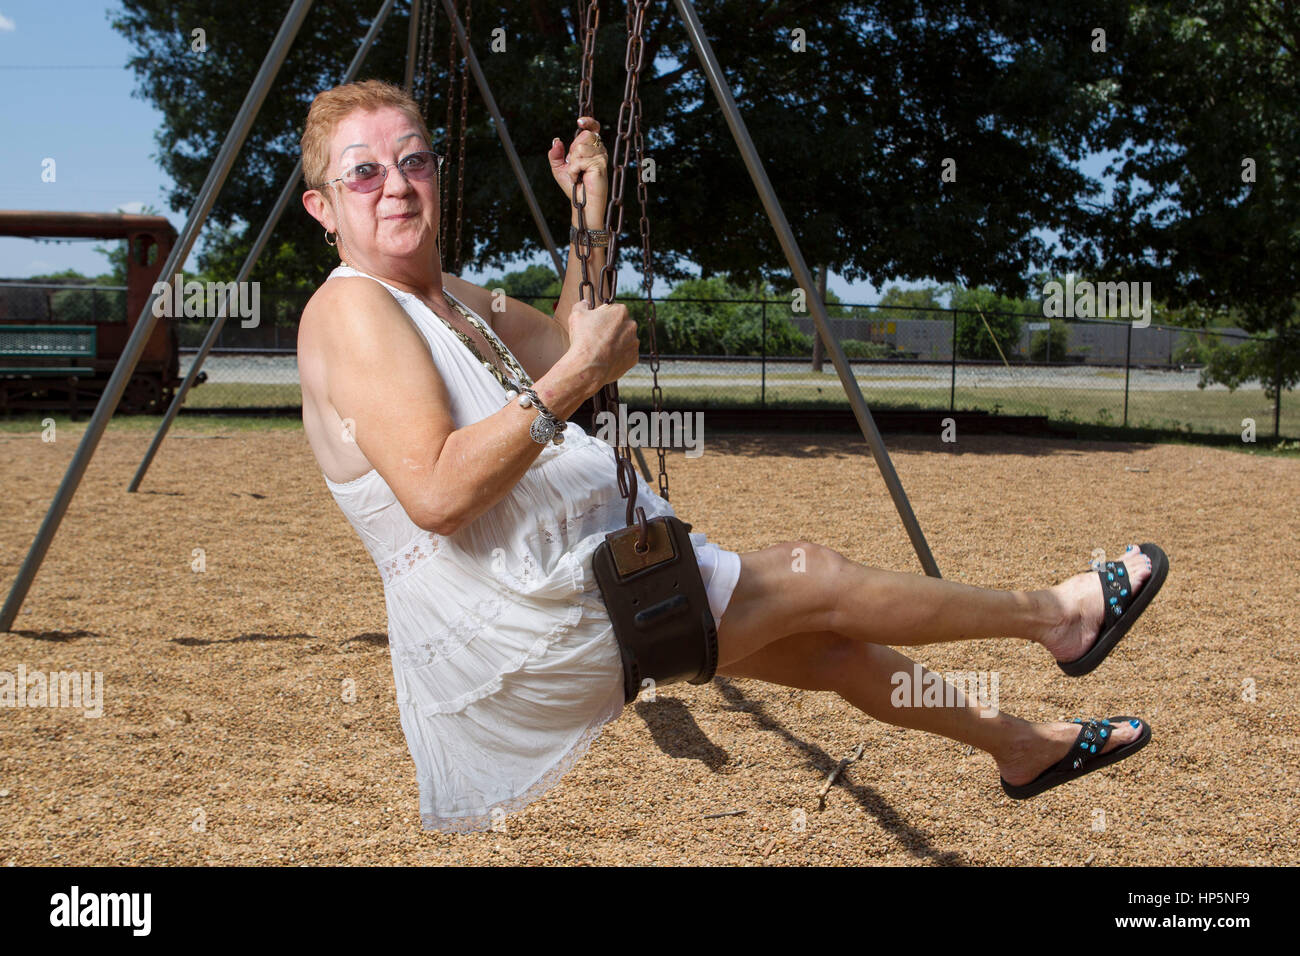 FILE Pic: Smithville, Texas, USA. July 15, 2011. Norma McCorvey, the anonymous plaintiff known as Jane Roe in the Supreme Court's landmark 1973 Roe vs. Wade ruling legalizing abortion in the United States, swings in a local park.  McCorvey died, Feb. 18, 2017 in an assisted living center in Katy, Texas Credit: Bob Daemmrich/Alamy Live News Stock Photo